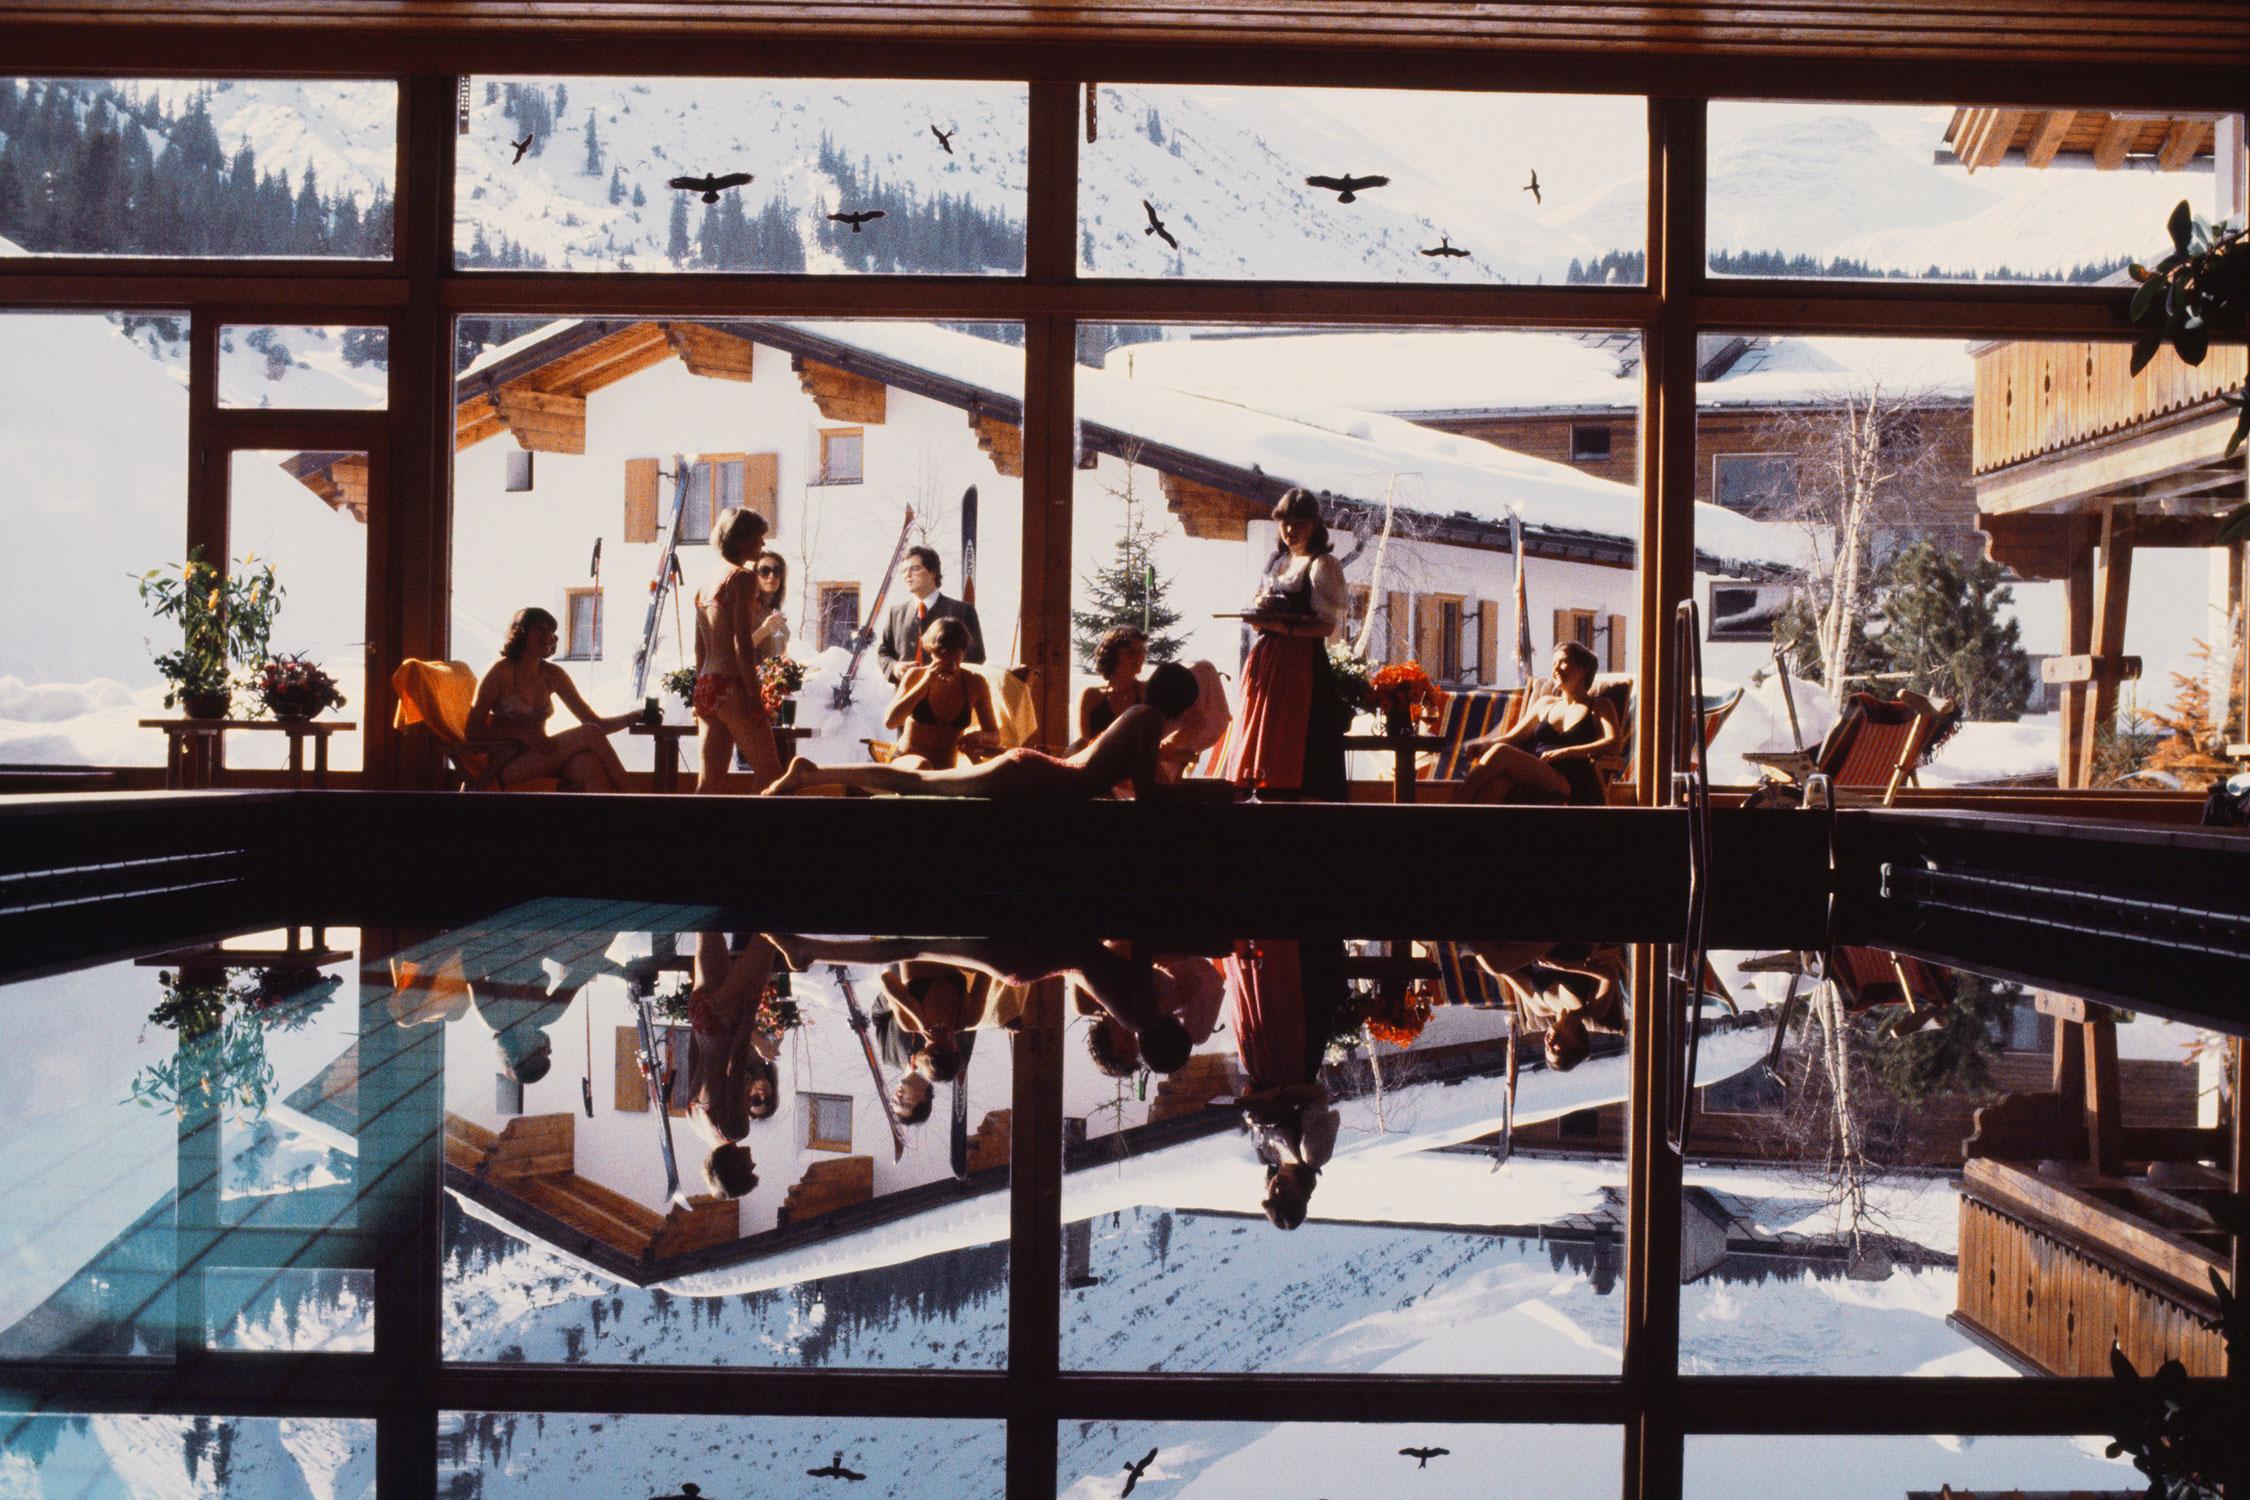 Slim Aarons
Gasthof Post Pool
1979 (printed later)
C print 
Estate stamped and numbered edition of 150 
with Certificate of authenticity

Guests lounging by the indoor swimming pool of the Gasthof Post in Lech, Austria, February 1979. (Photo by Slim